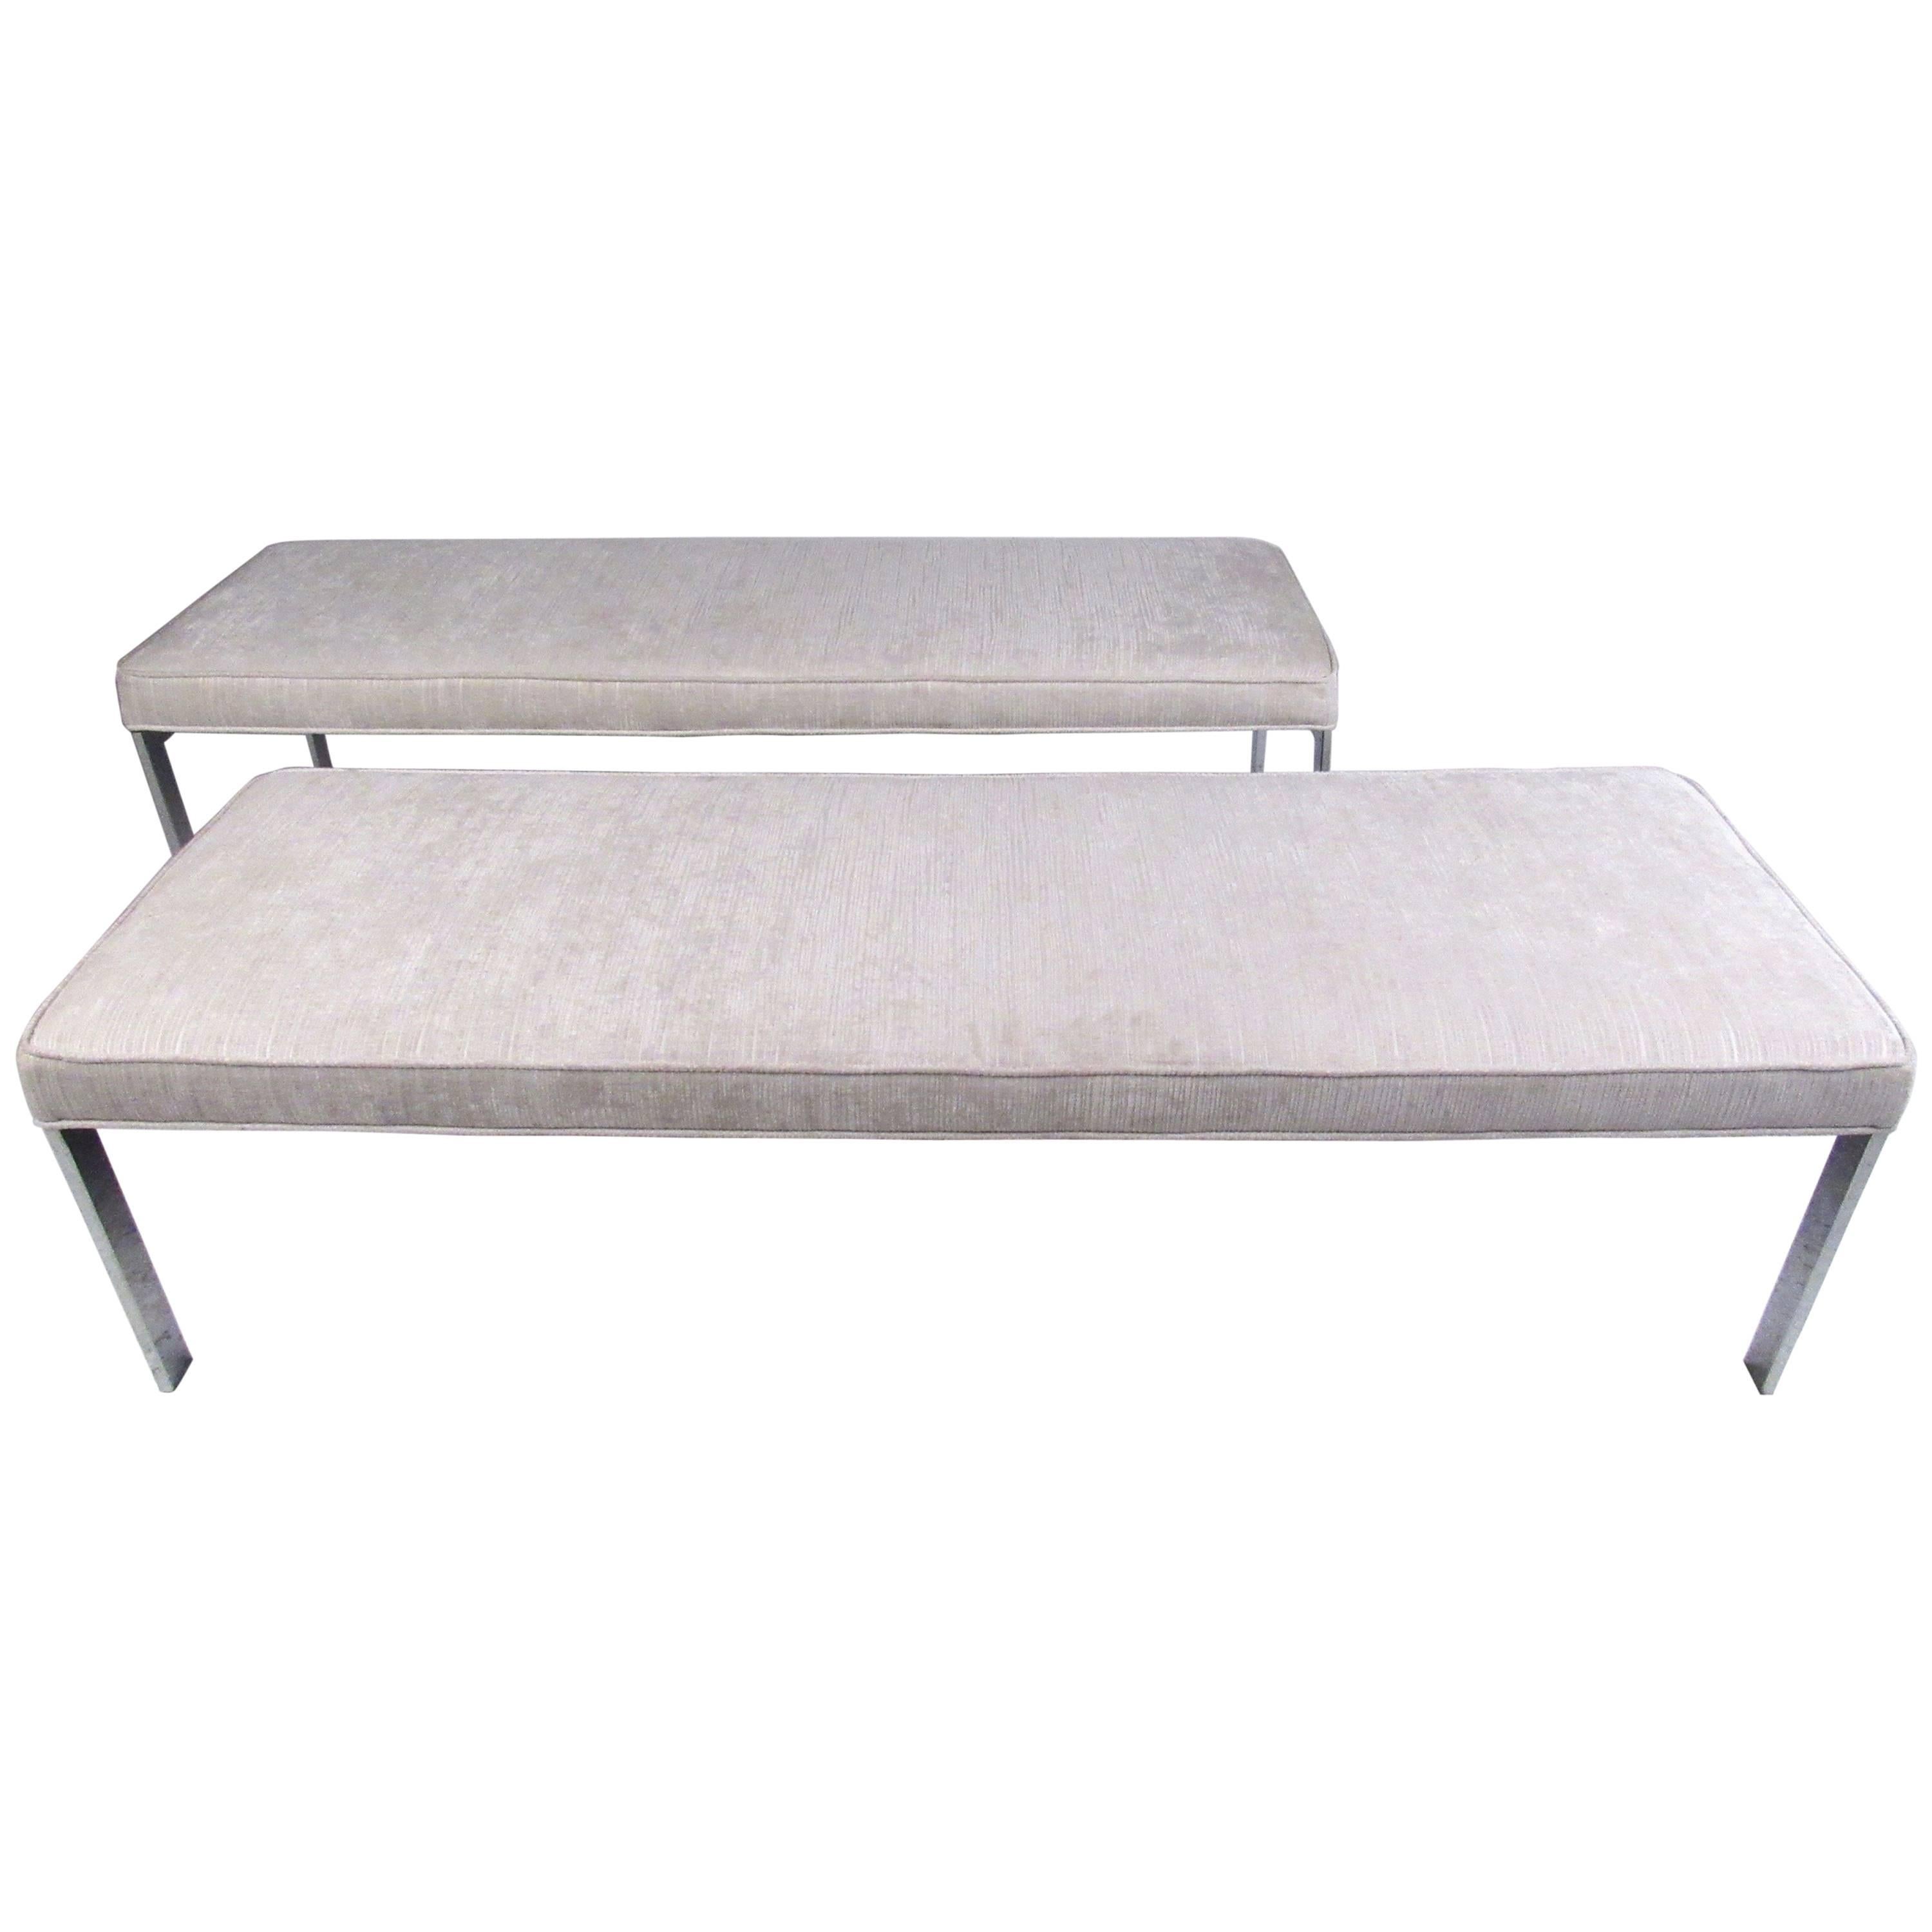 Contemporary Modern Upholstered Bench Seat